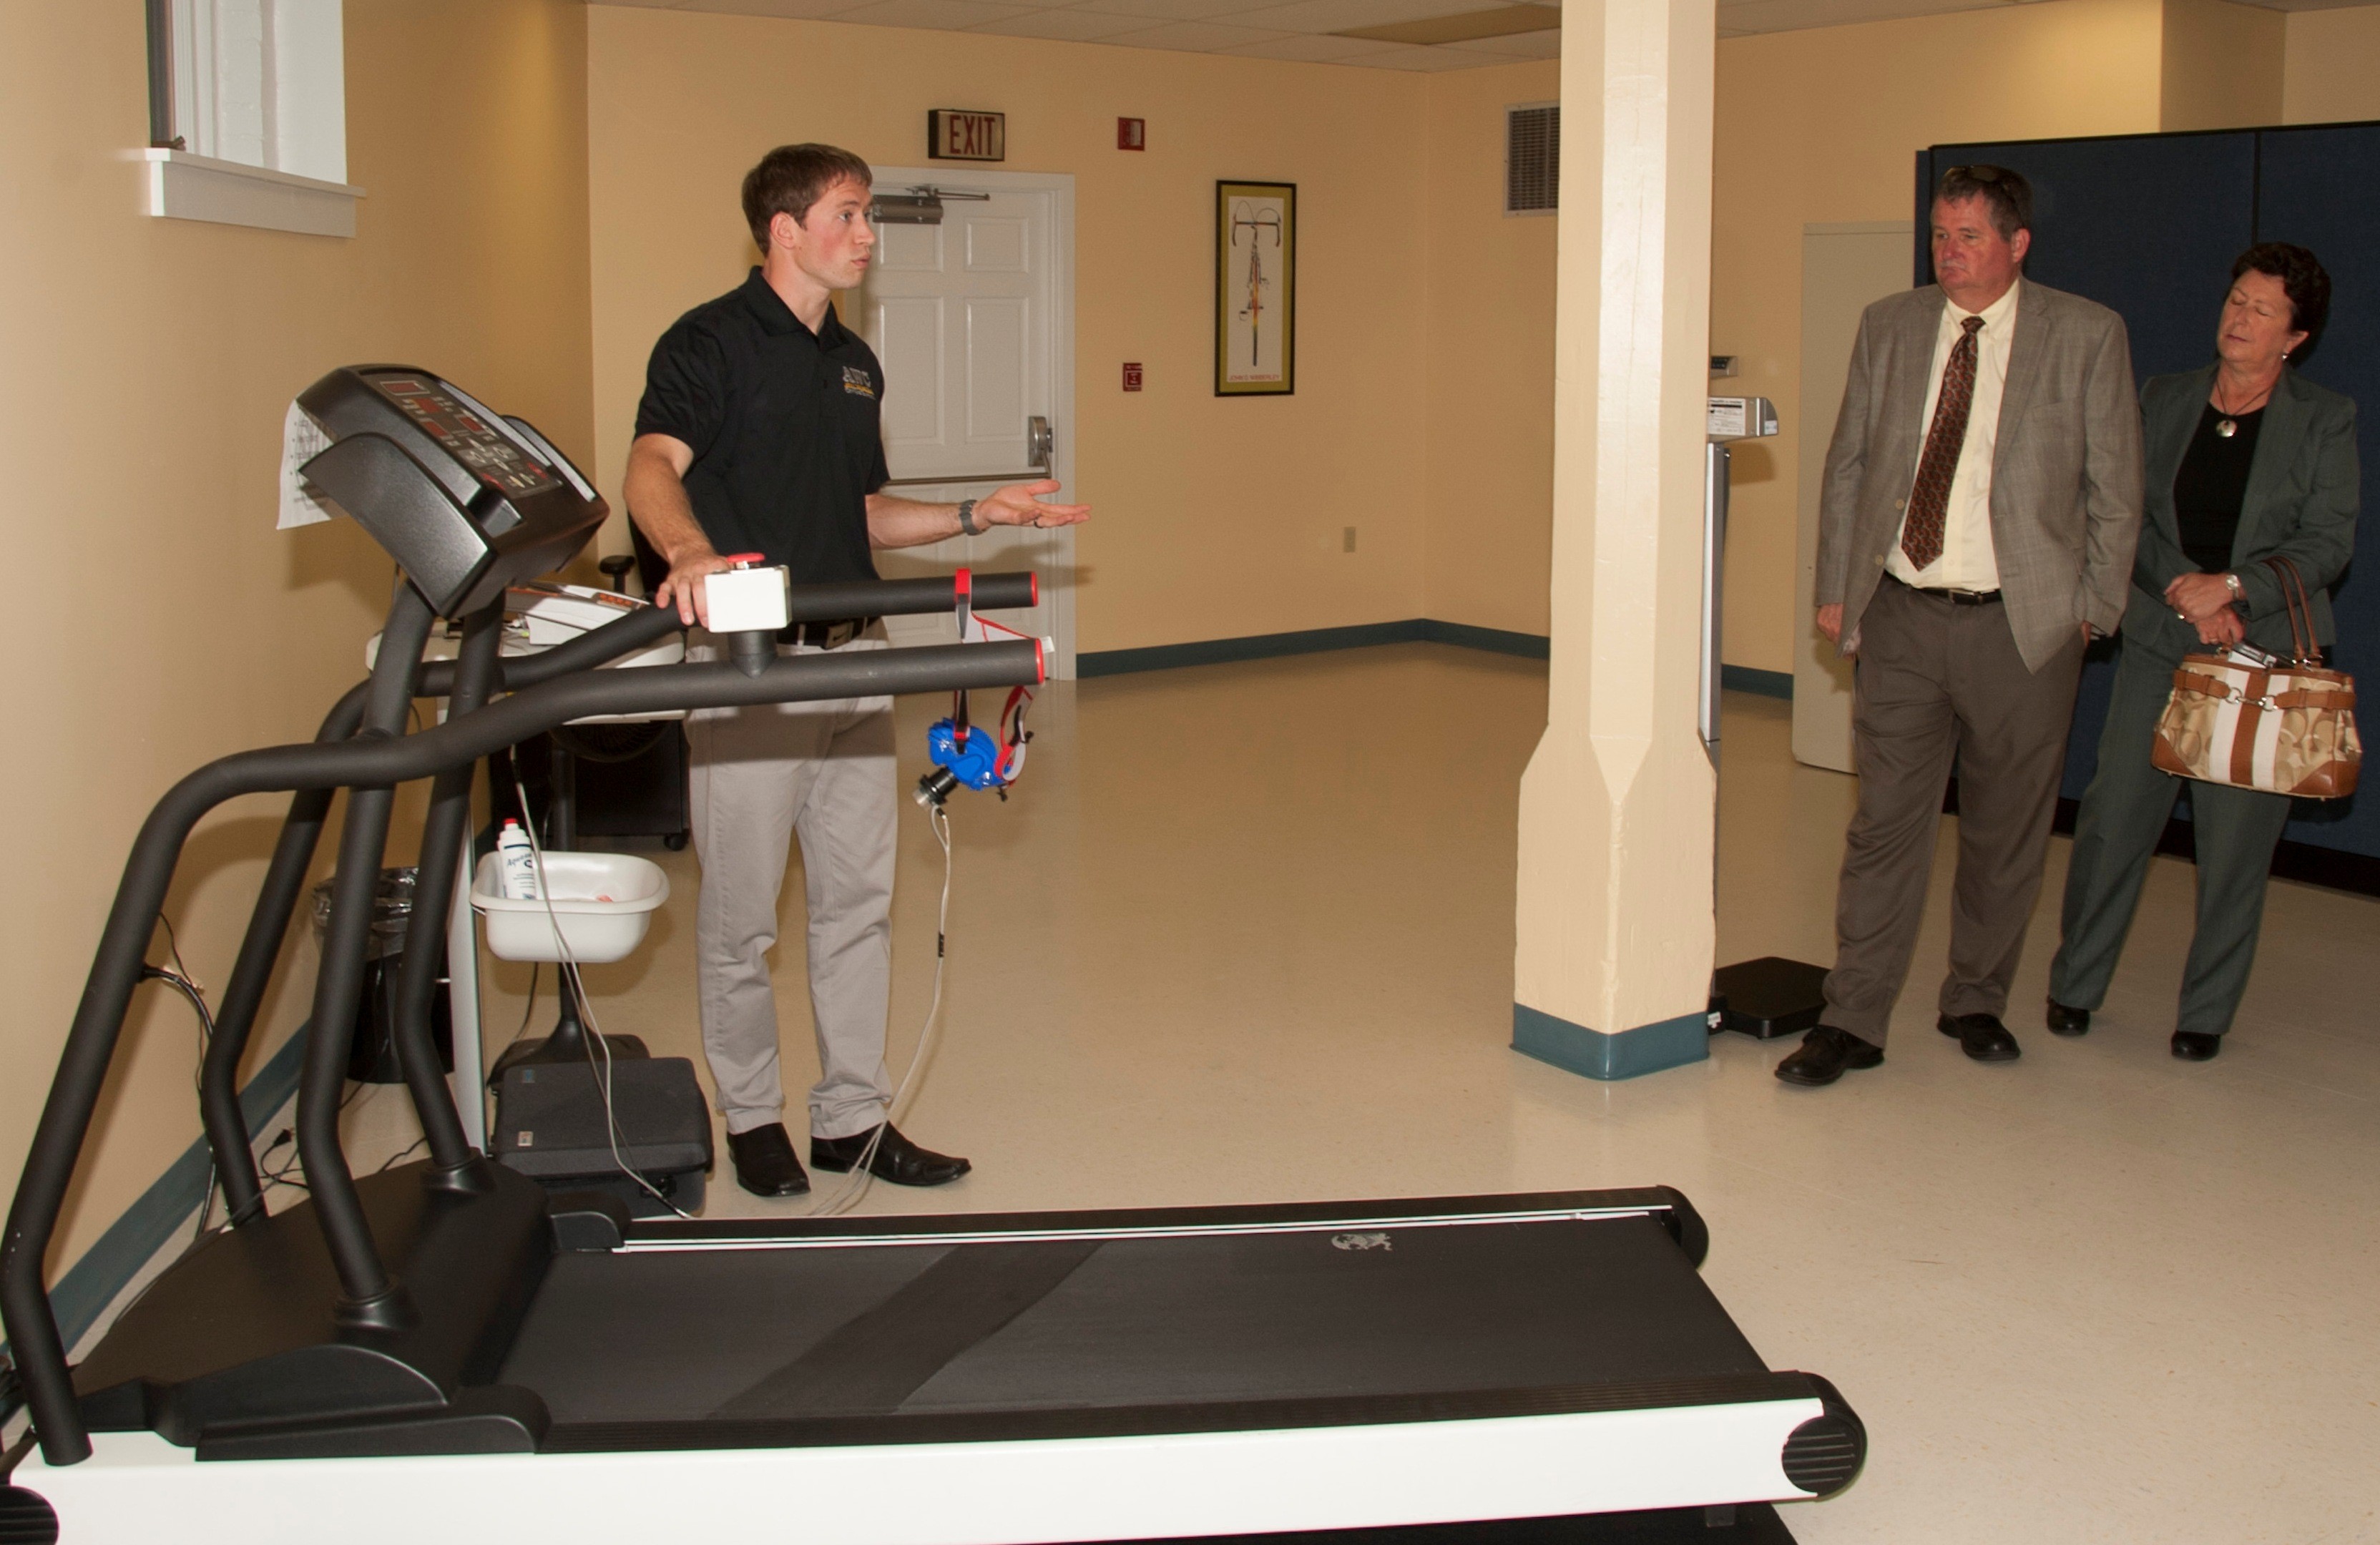 Newest Army Wellness Center launched at Carlisle Barracks ...